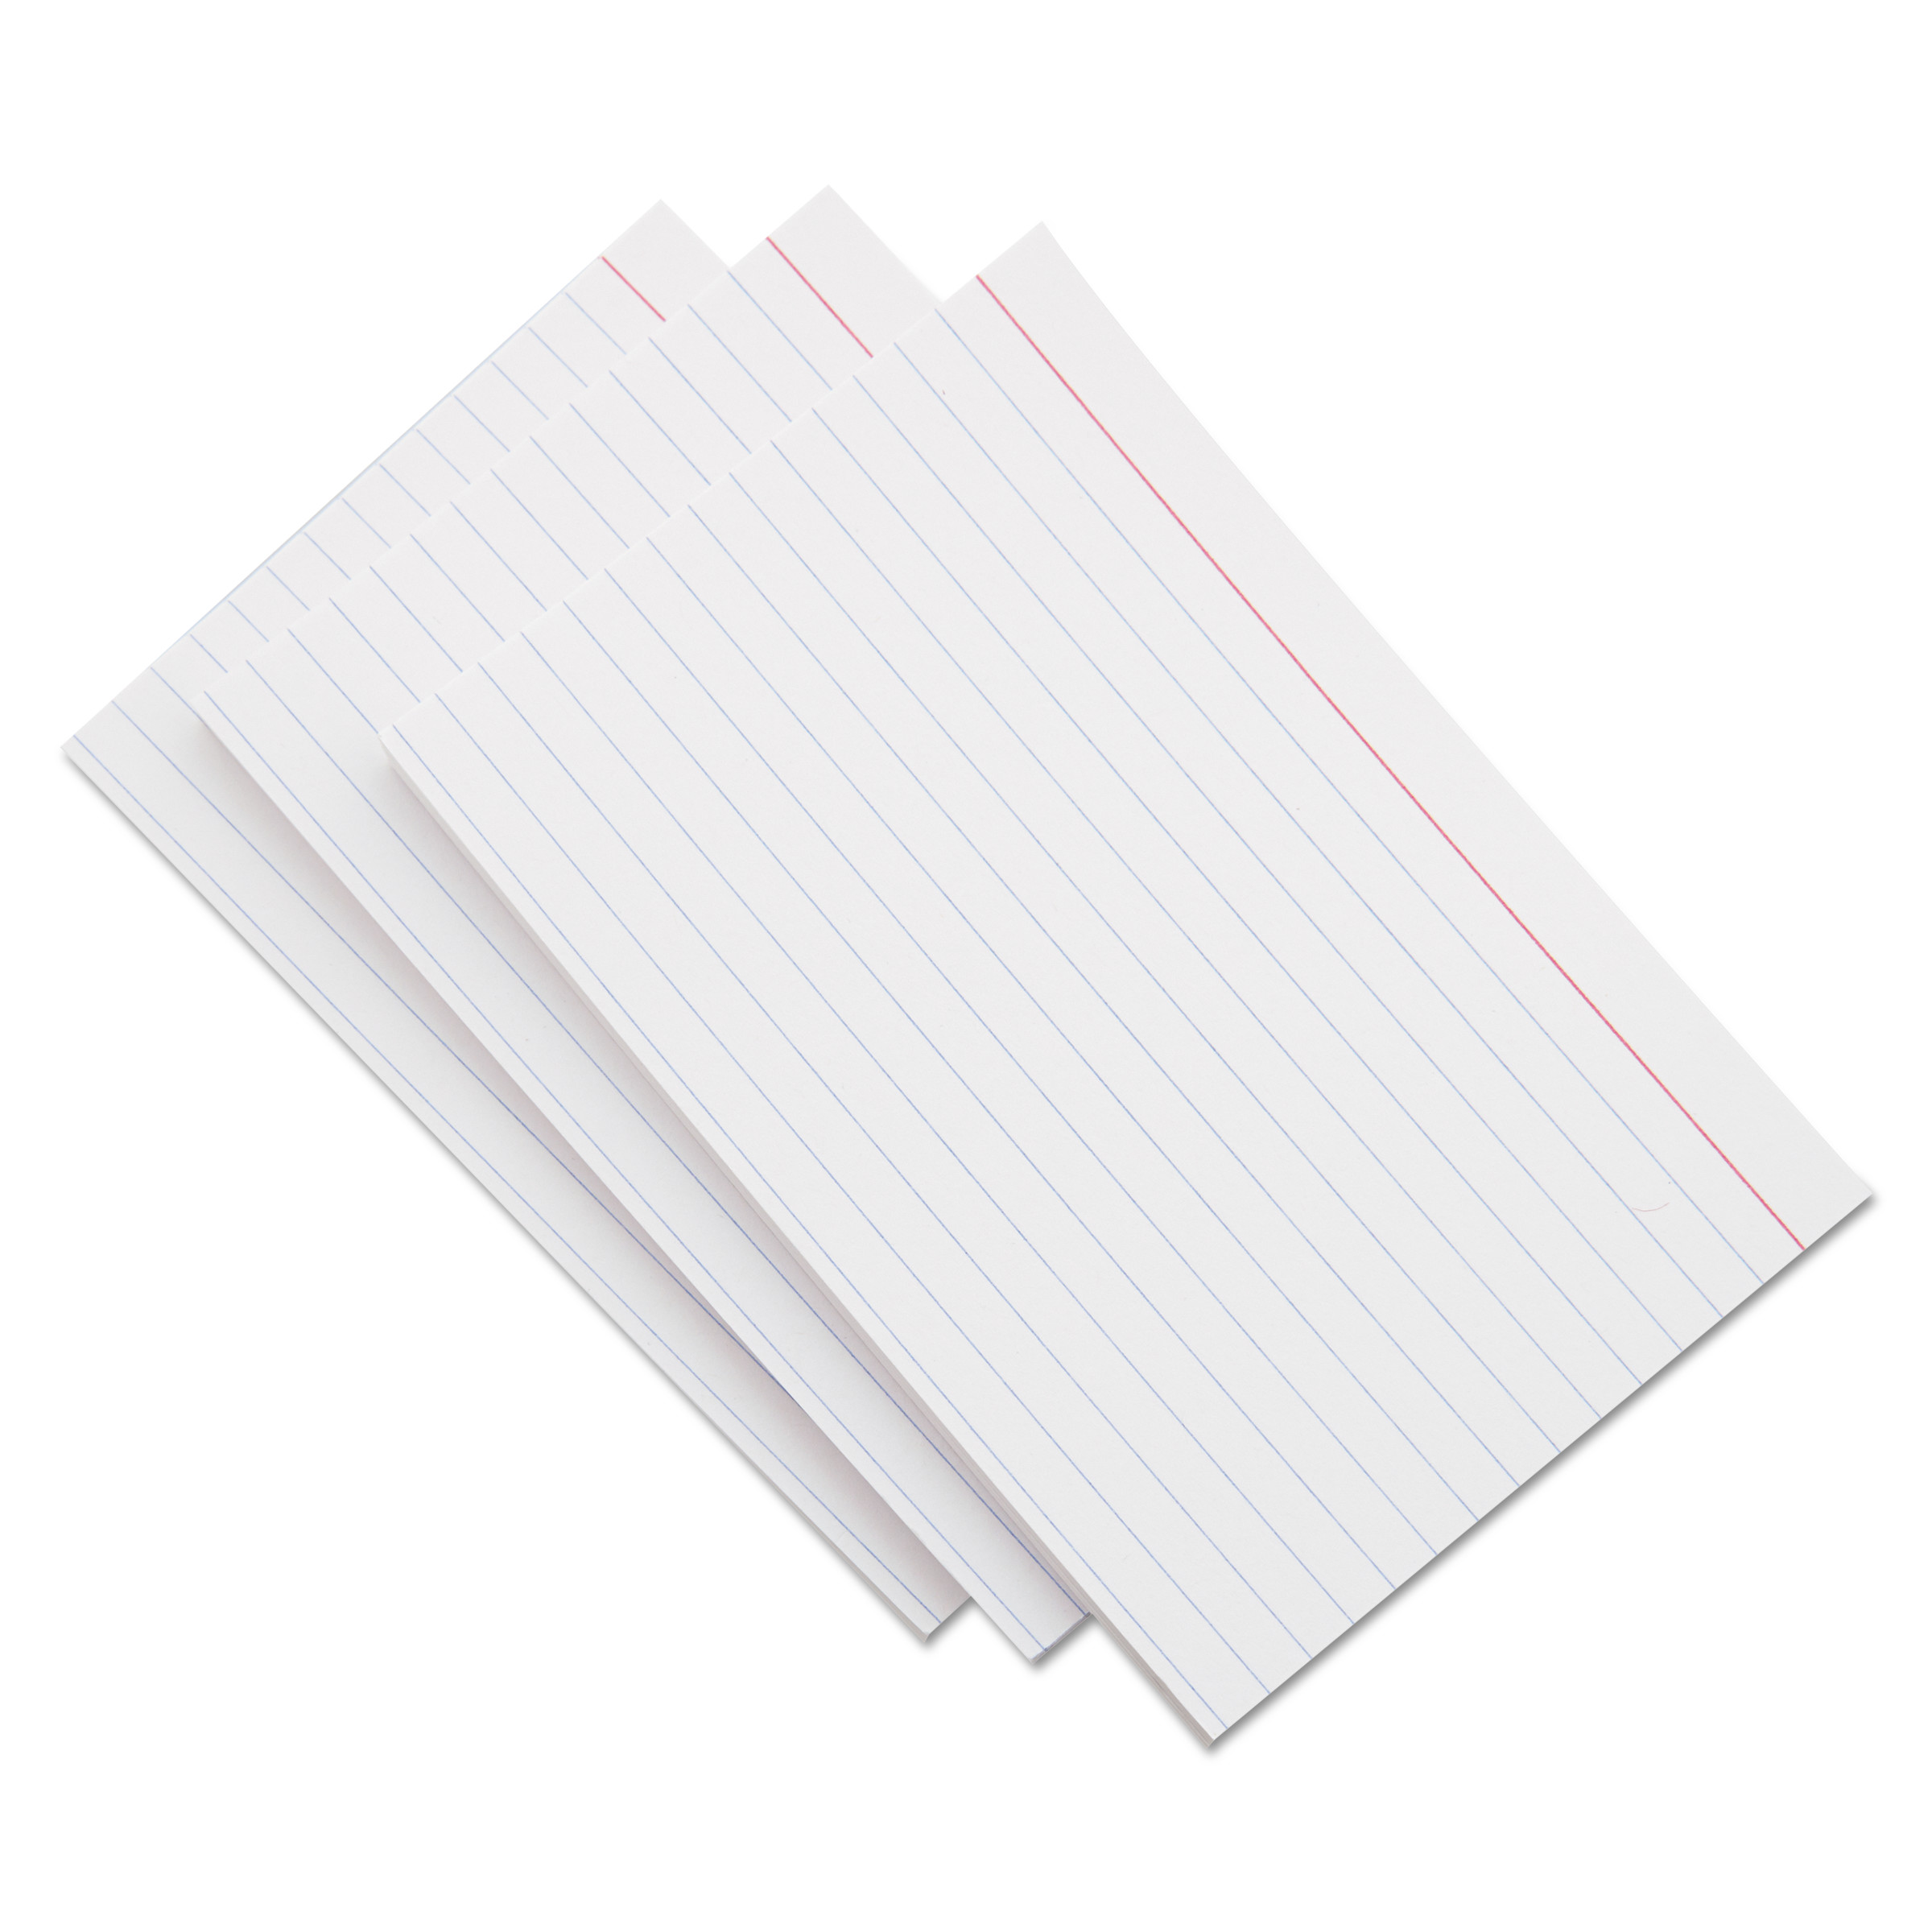 Universal Unruled Index Cards 5 x 8 White 100/Pack